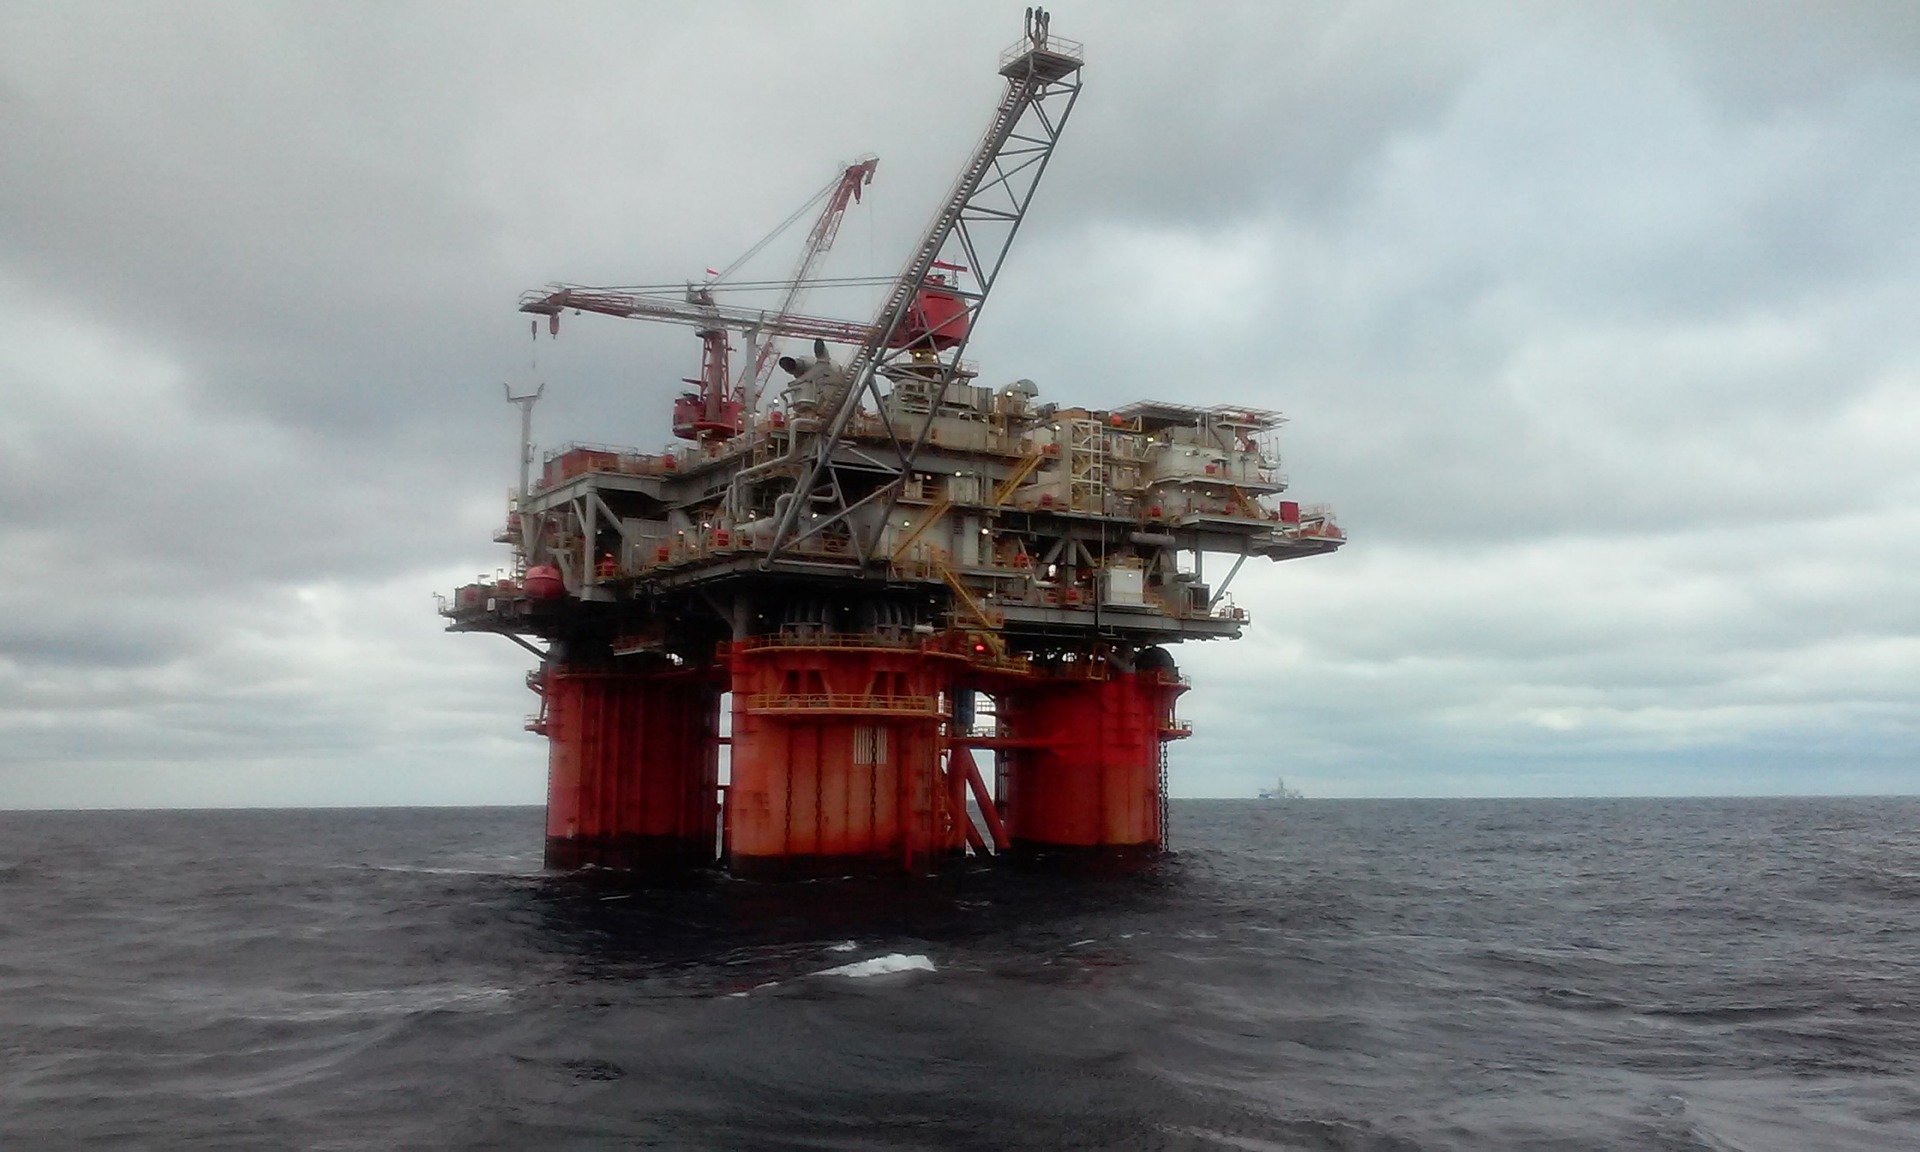 Indonesia has largest 2D oil, gas seismic survey in Asia Pacific